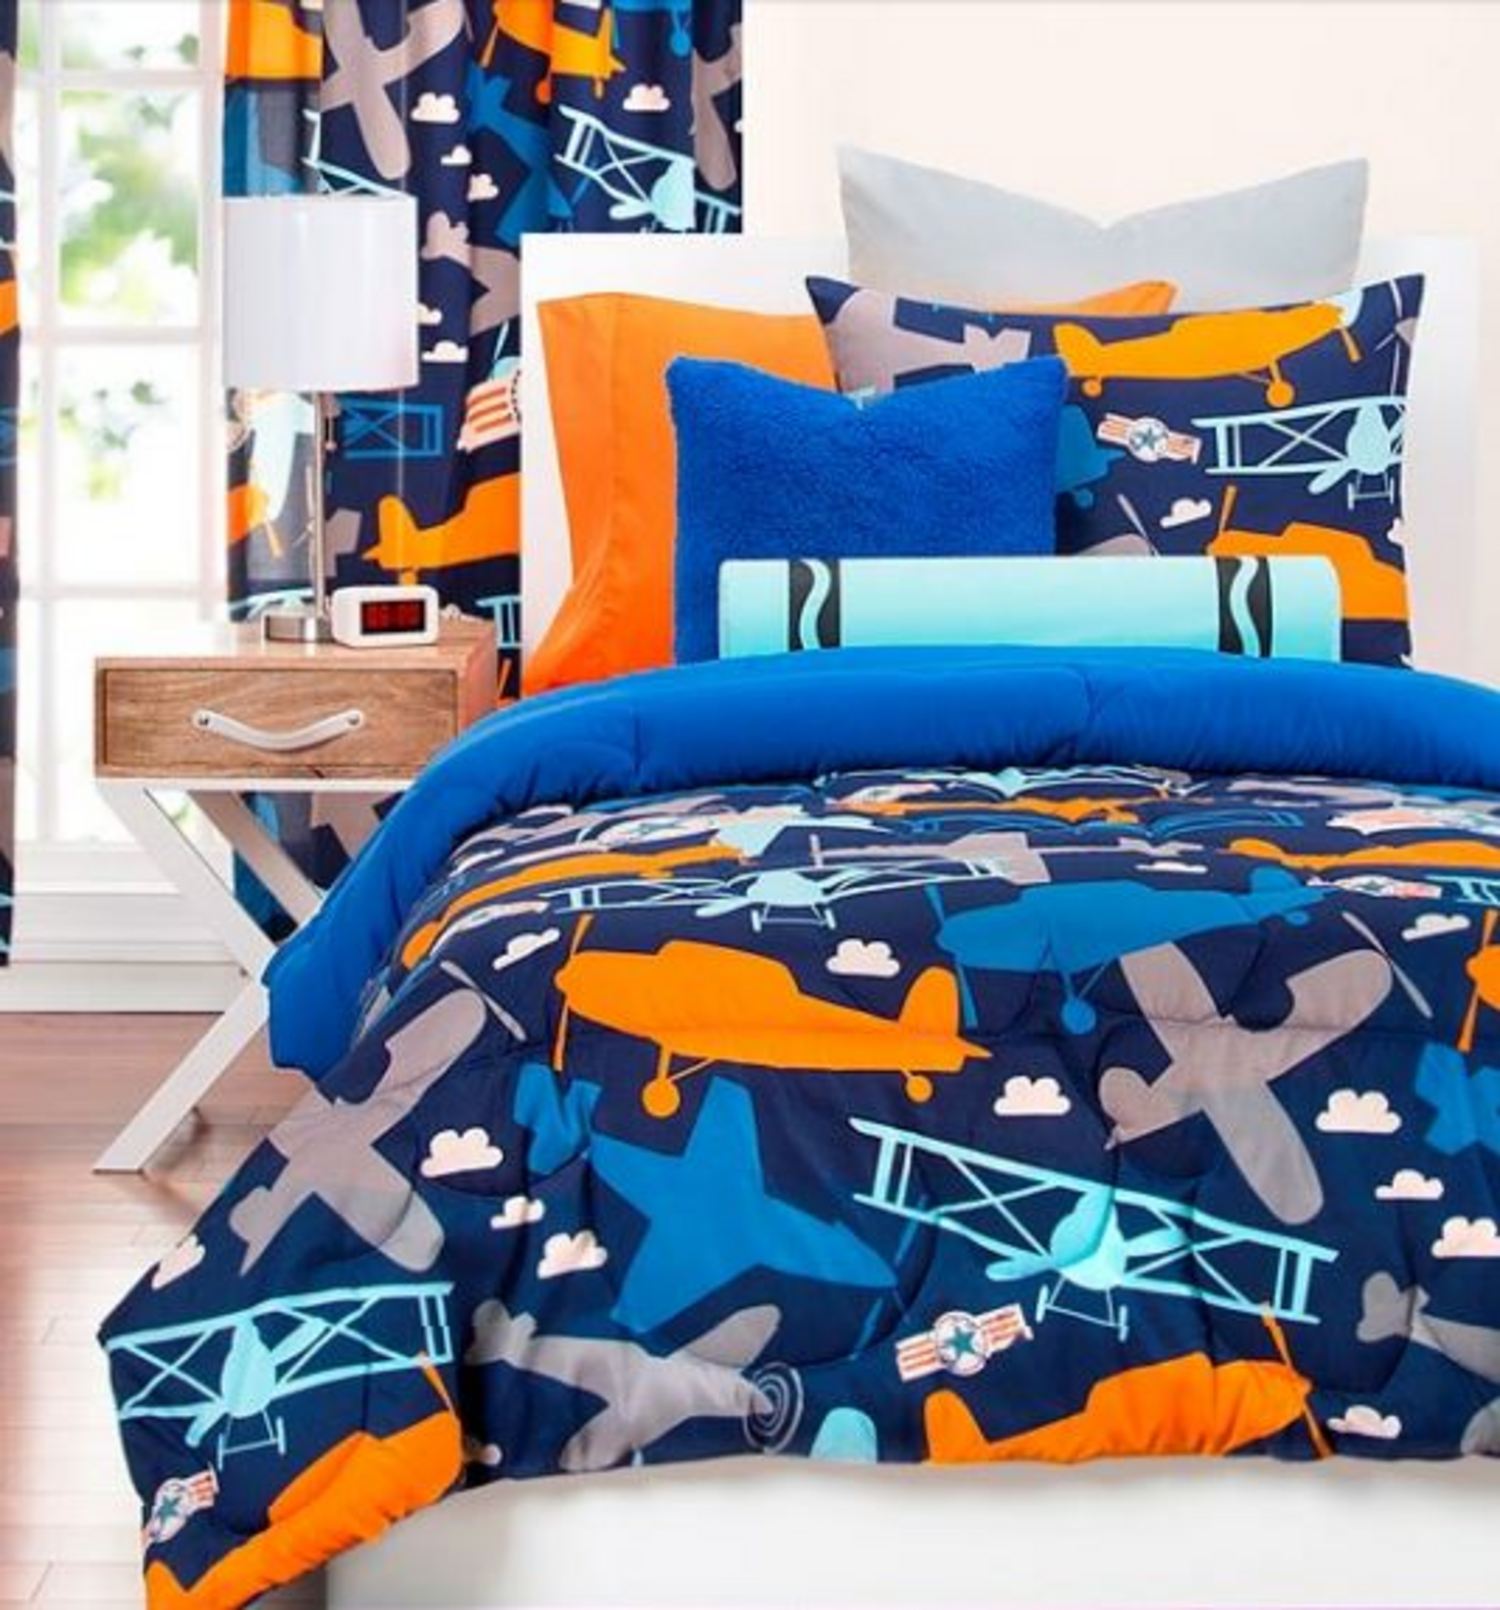 Take Flight by Crayola Bedding by SiS Covers - BeddingSuperStore.com